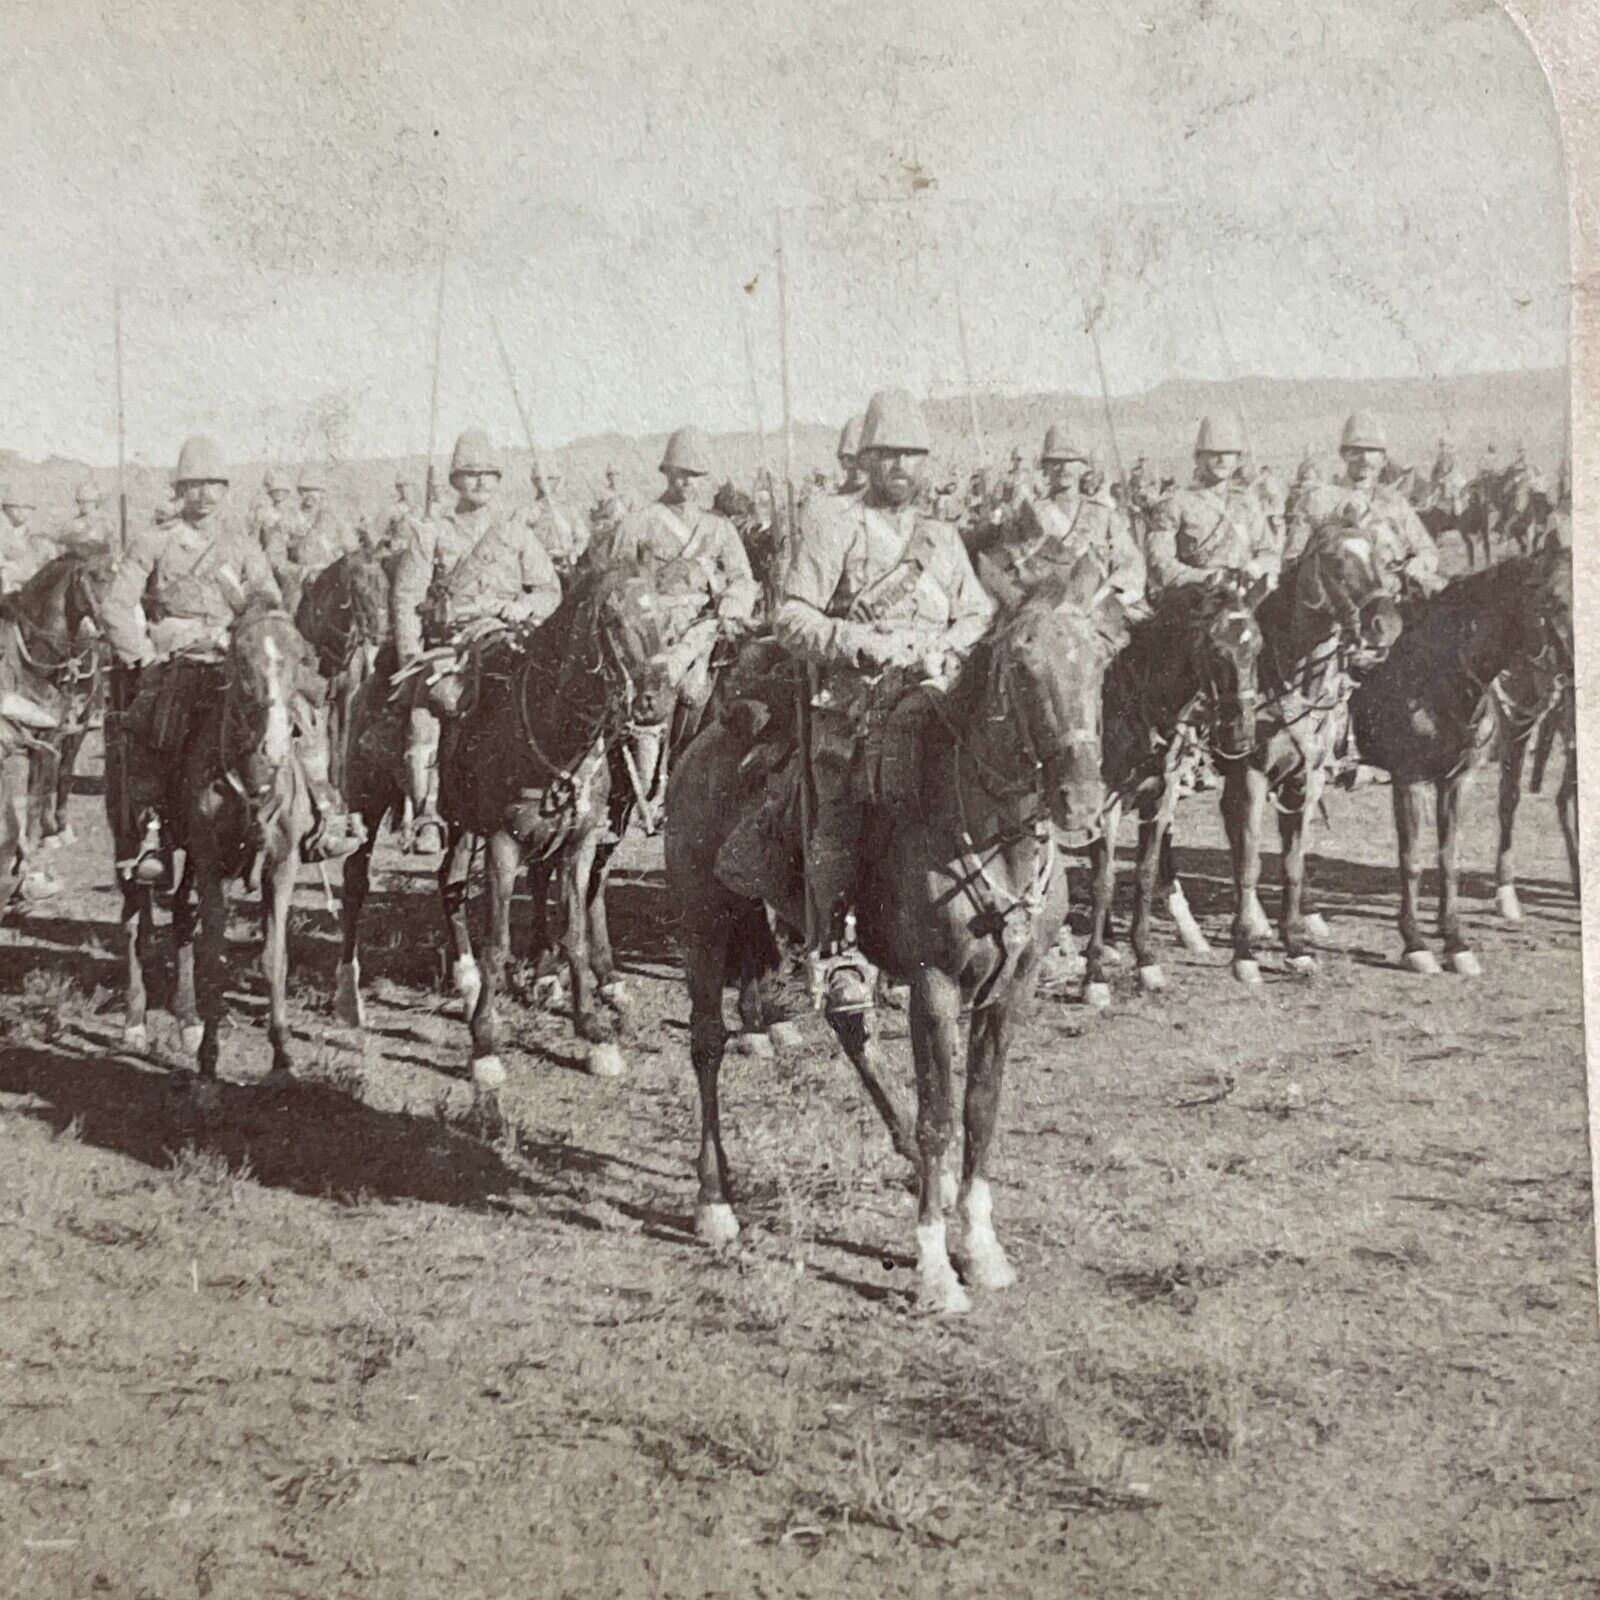 Antique 1900 Boer War Dragoons Cavalry South Africa Stereoview Photo Card P5542